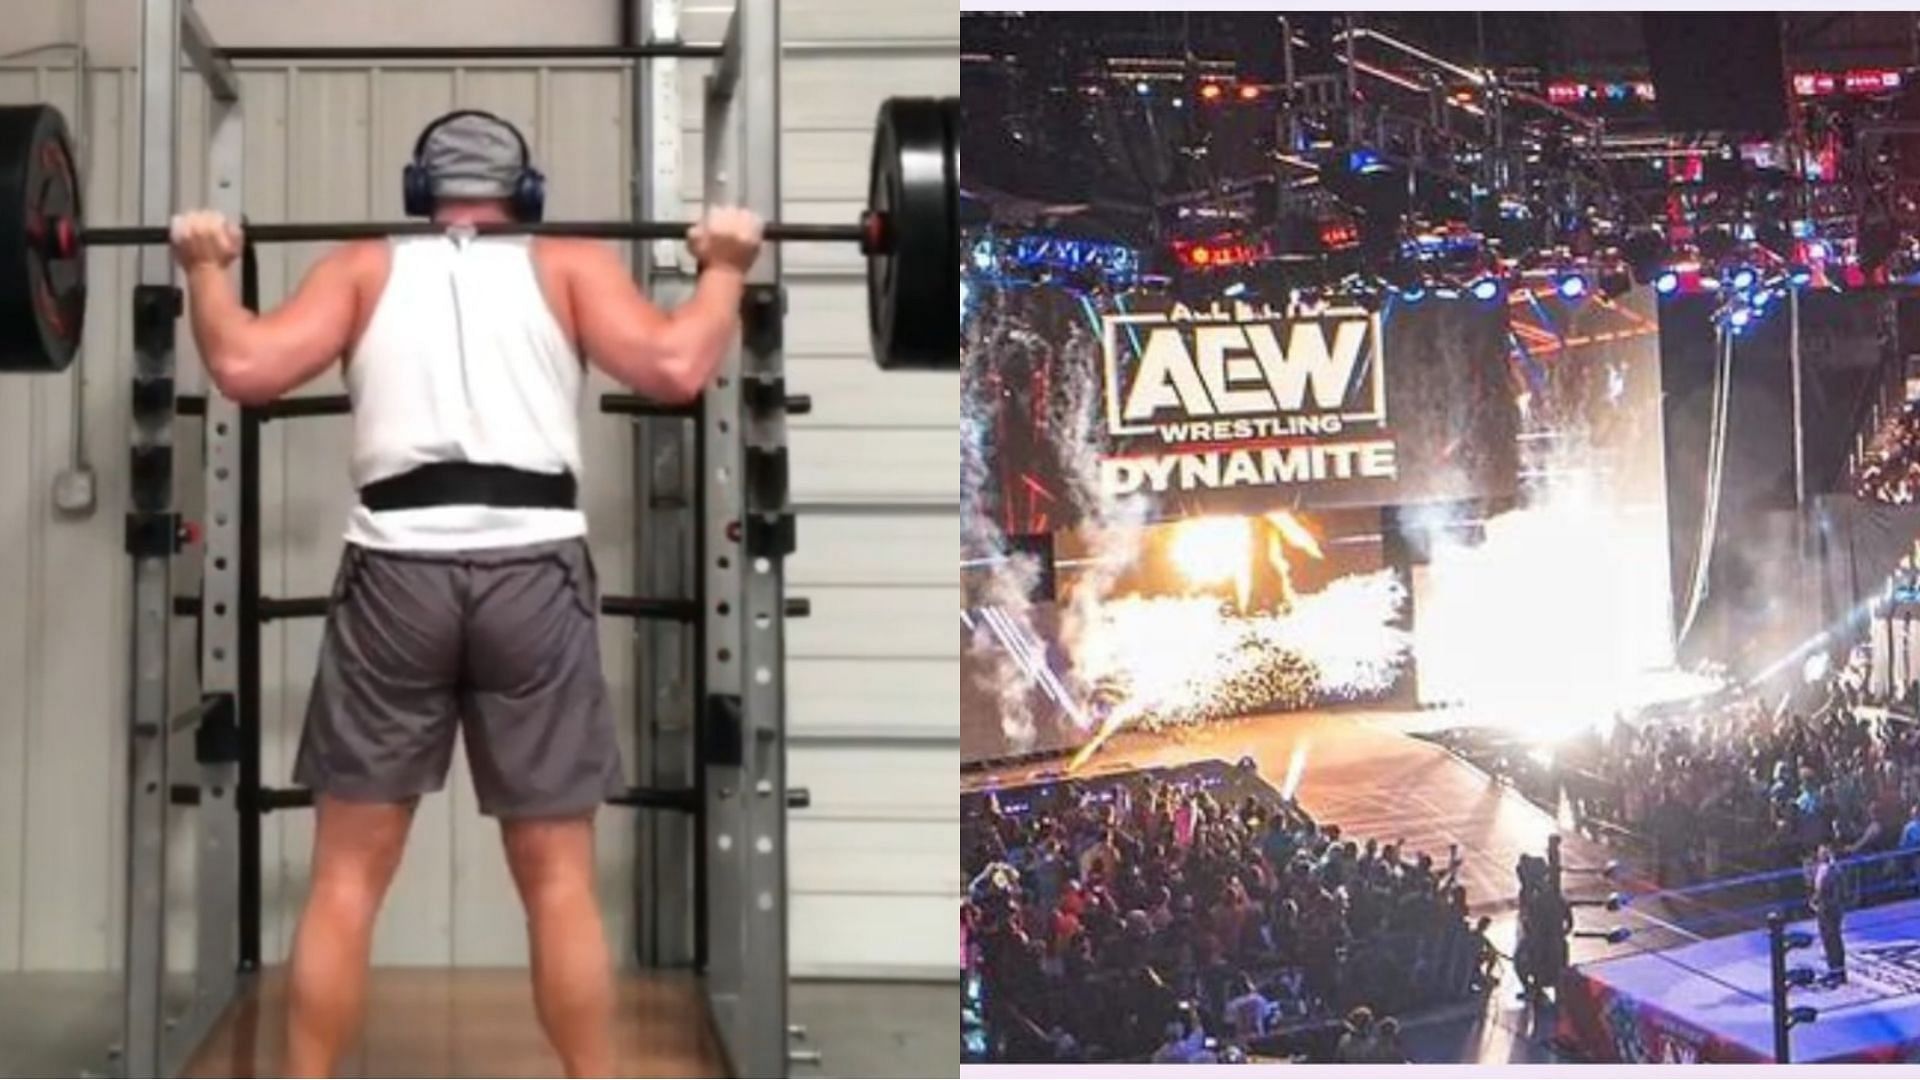 AEW has been one of the leading wrestling promotions in the business